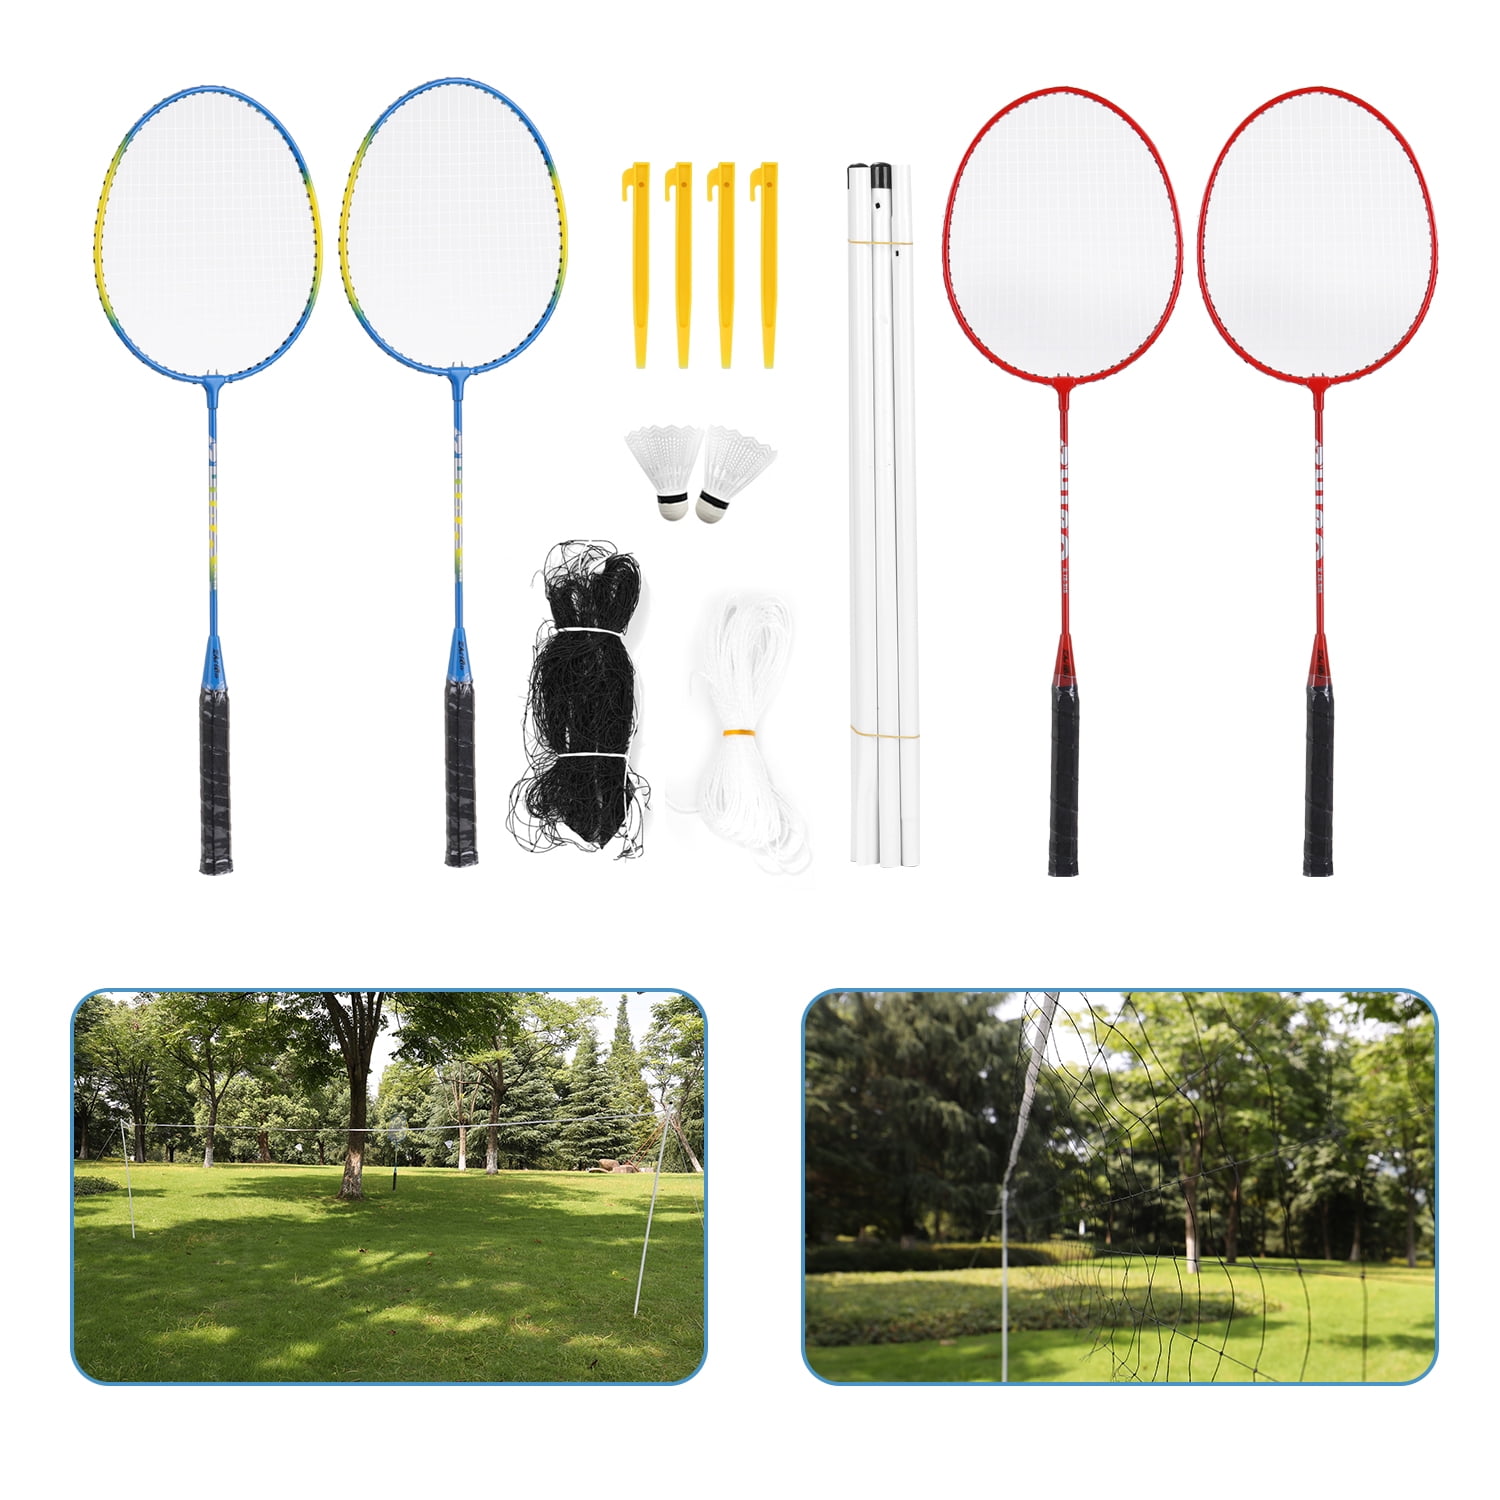 Lixada 1 Pair Badminton Rackets with Balls 2 Player Badminton Set Carbon Badminton Racquet Premium Quality Protective Racket Cover and Overgrip for Children Kids Indoor Outdoor Sport Entry Level Rackets Steel/&Aluminum Construction